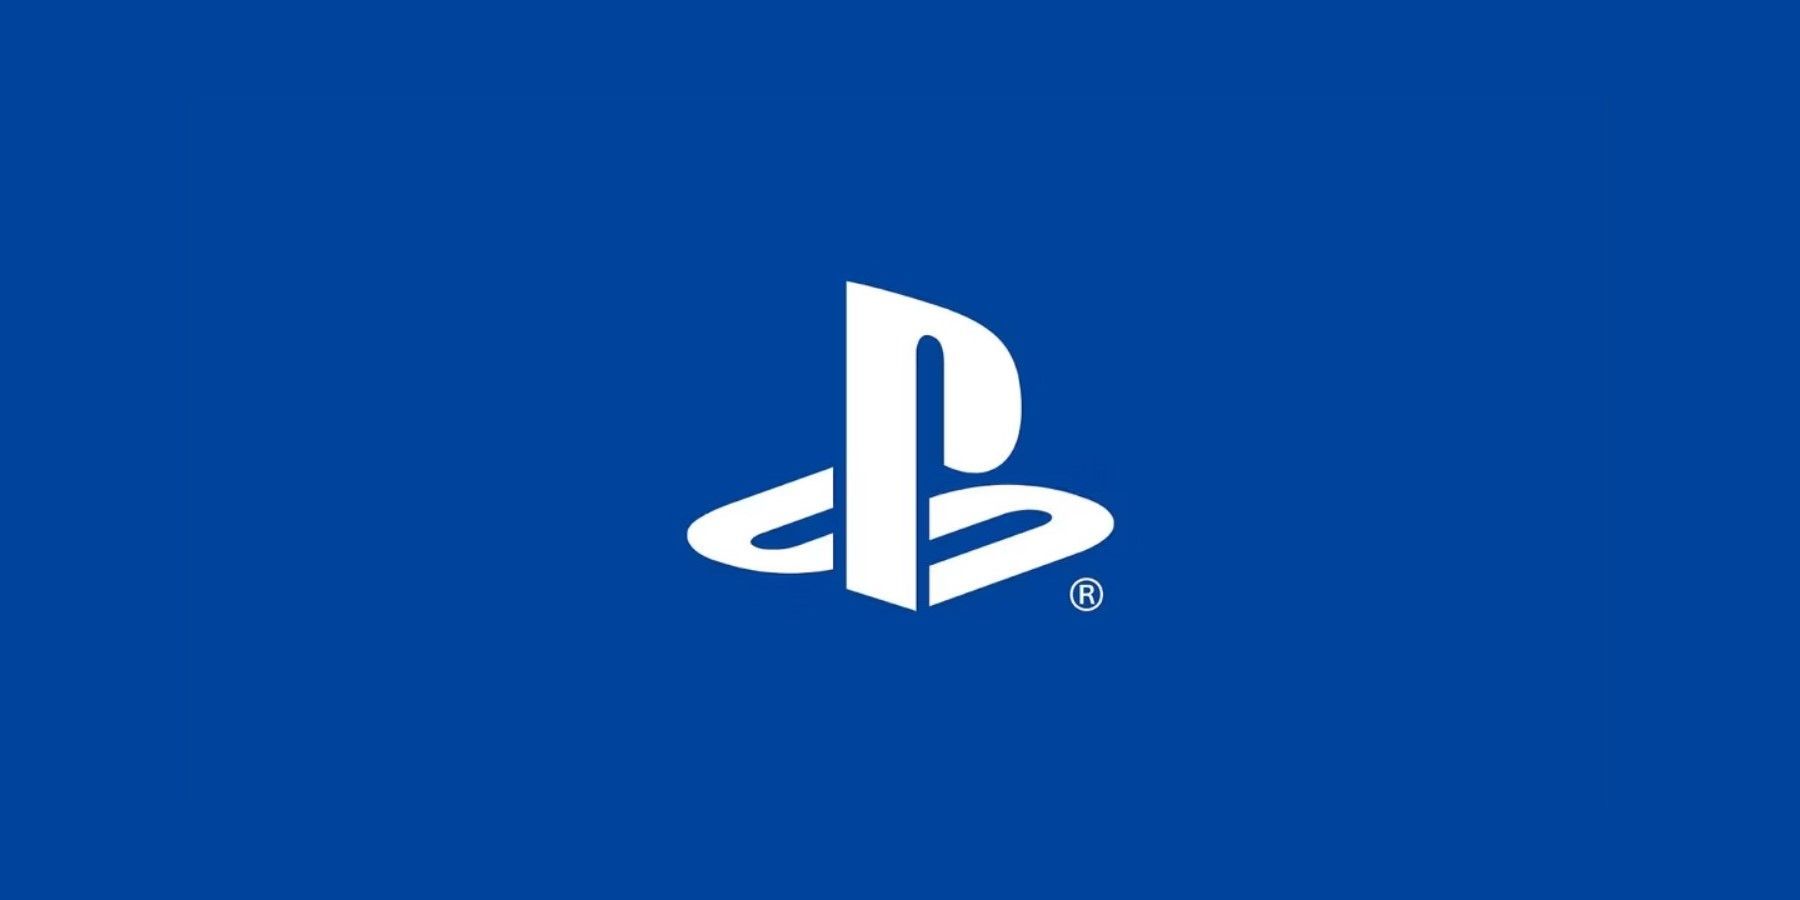 PlayStation's Next PS5 Showcase Is September 9